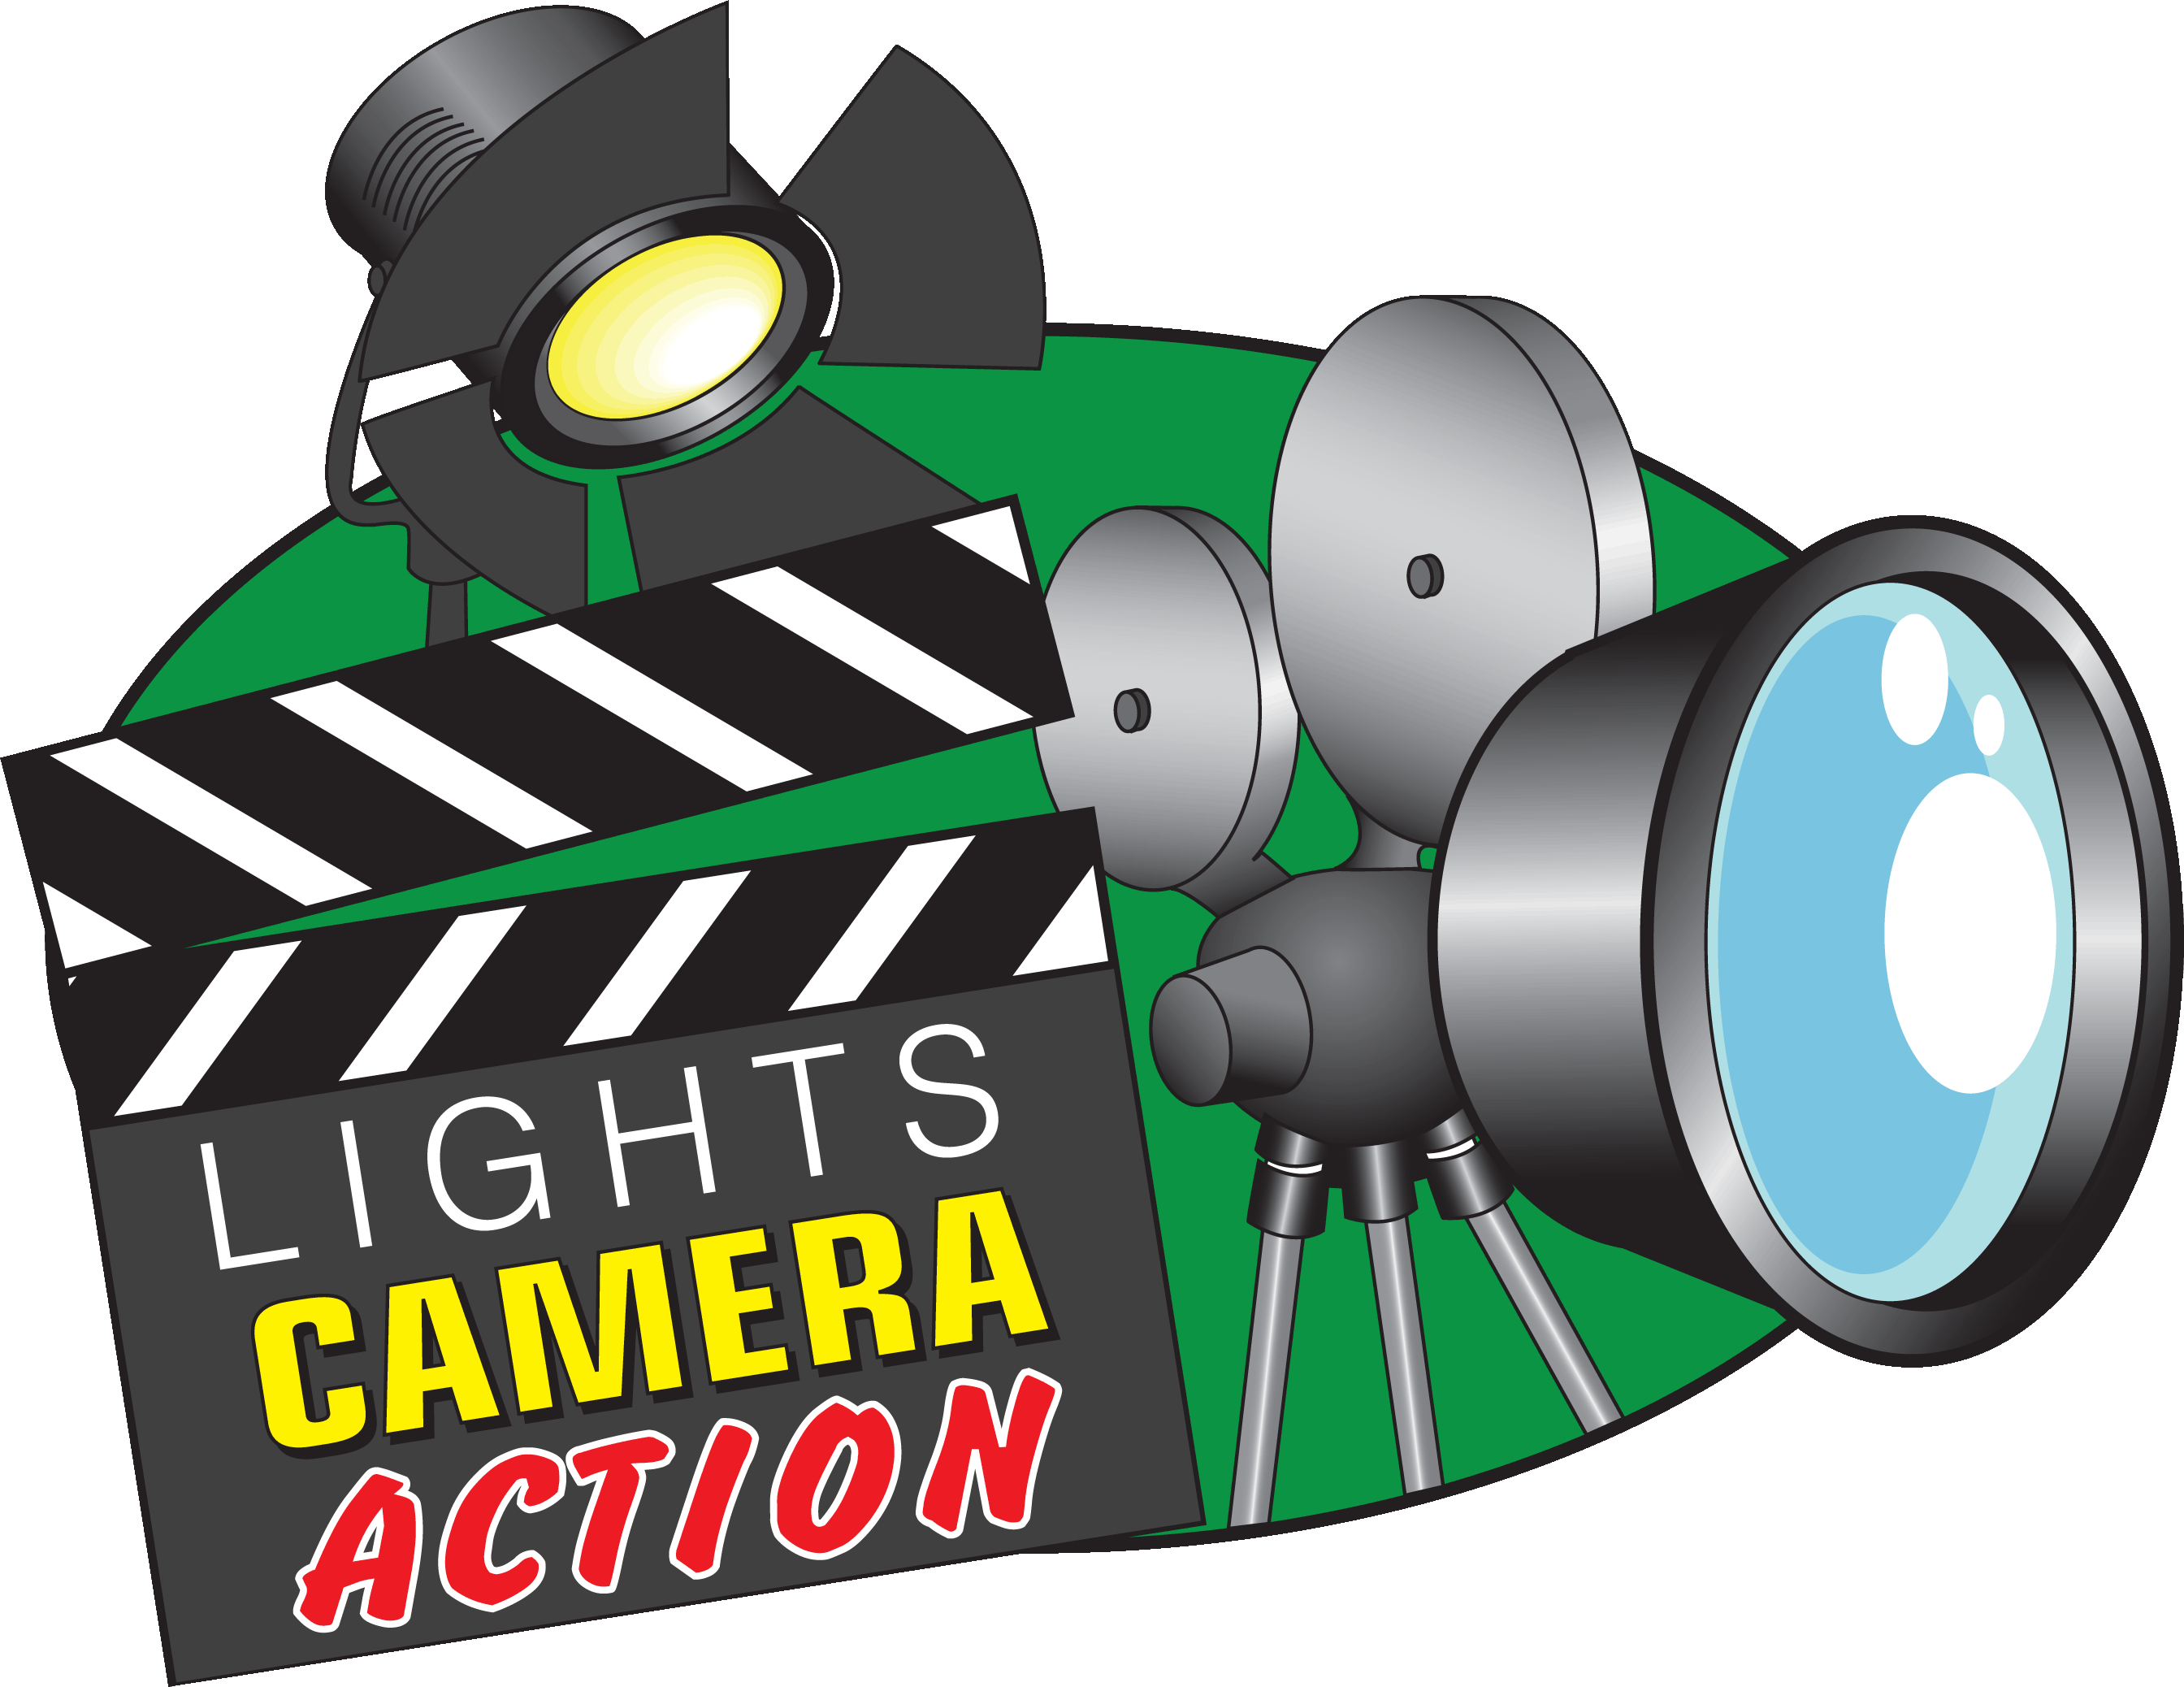 Movie clipart actor. Lights camera action just